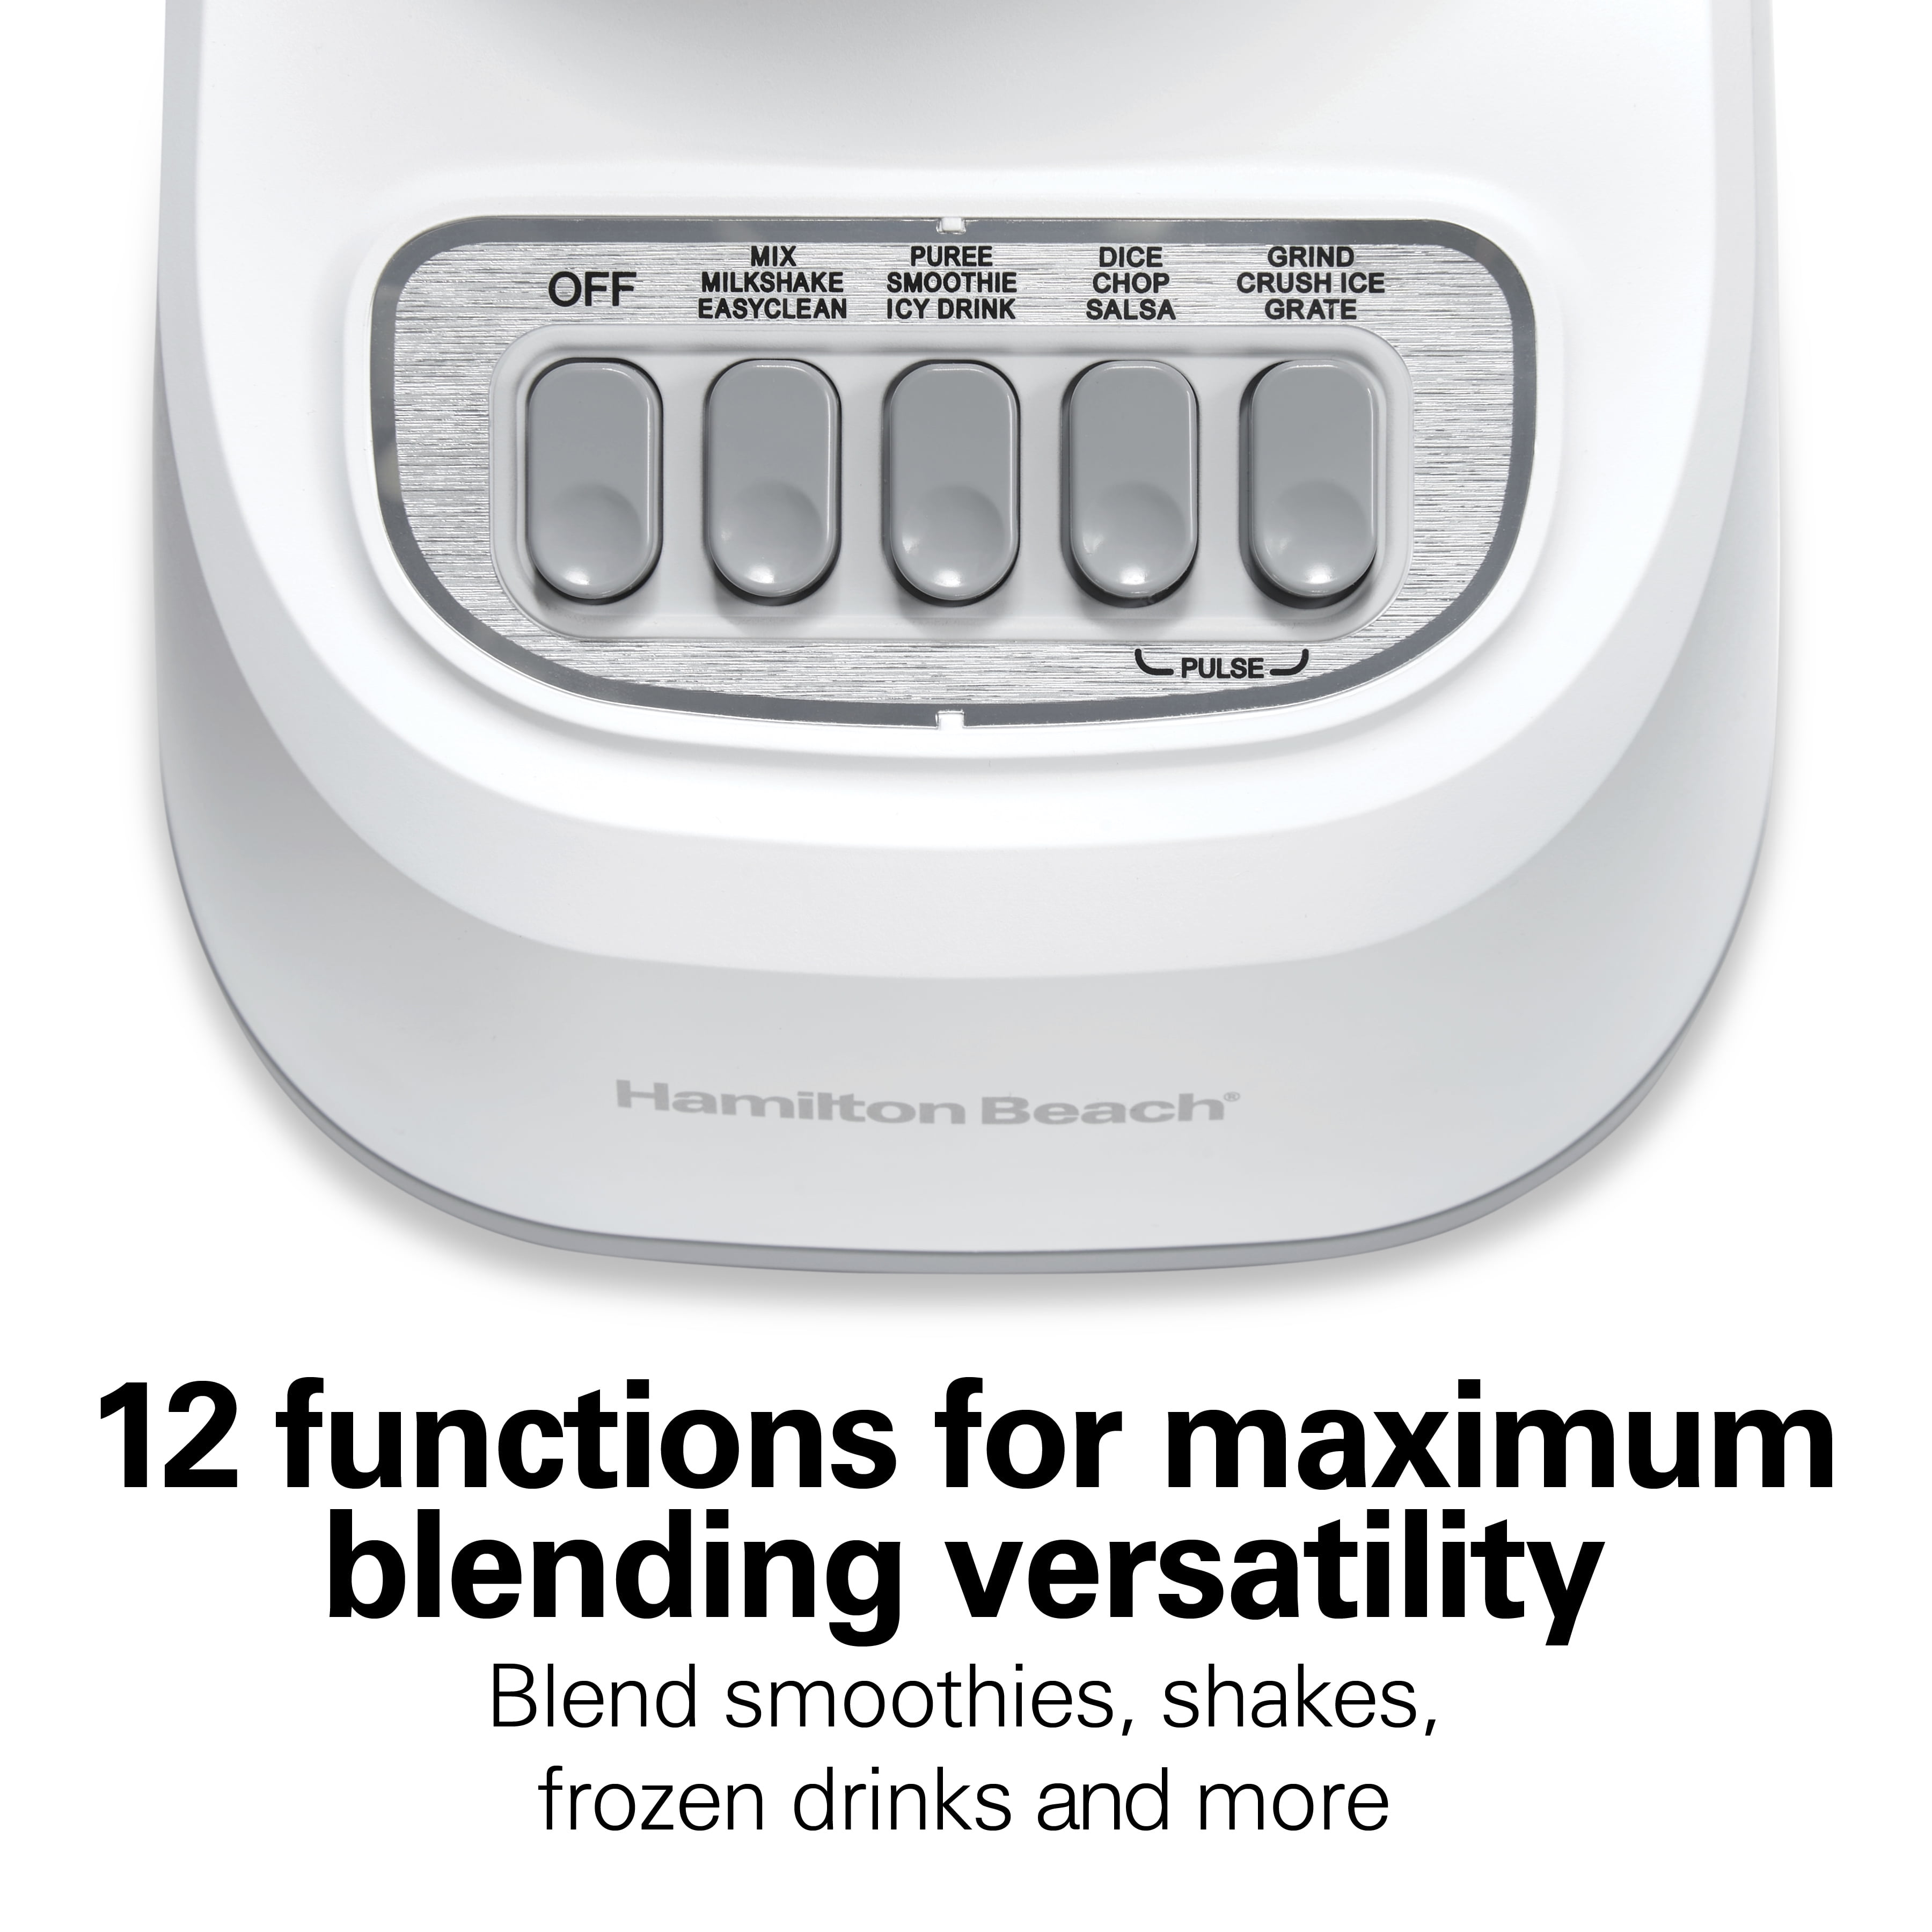 This Hamilton Beach blender has 12 functions and is 20% off right now